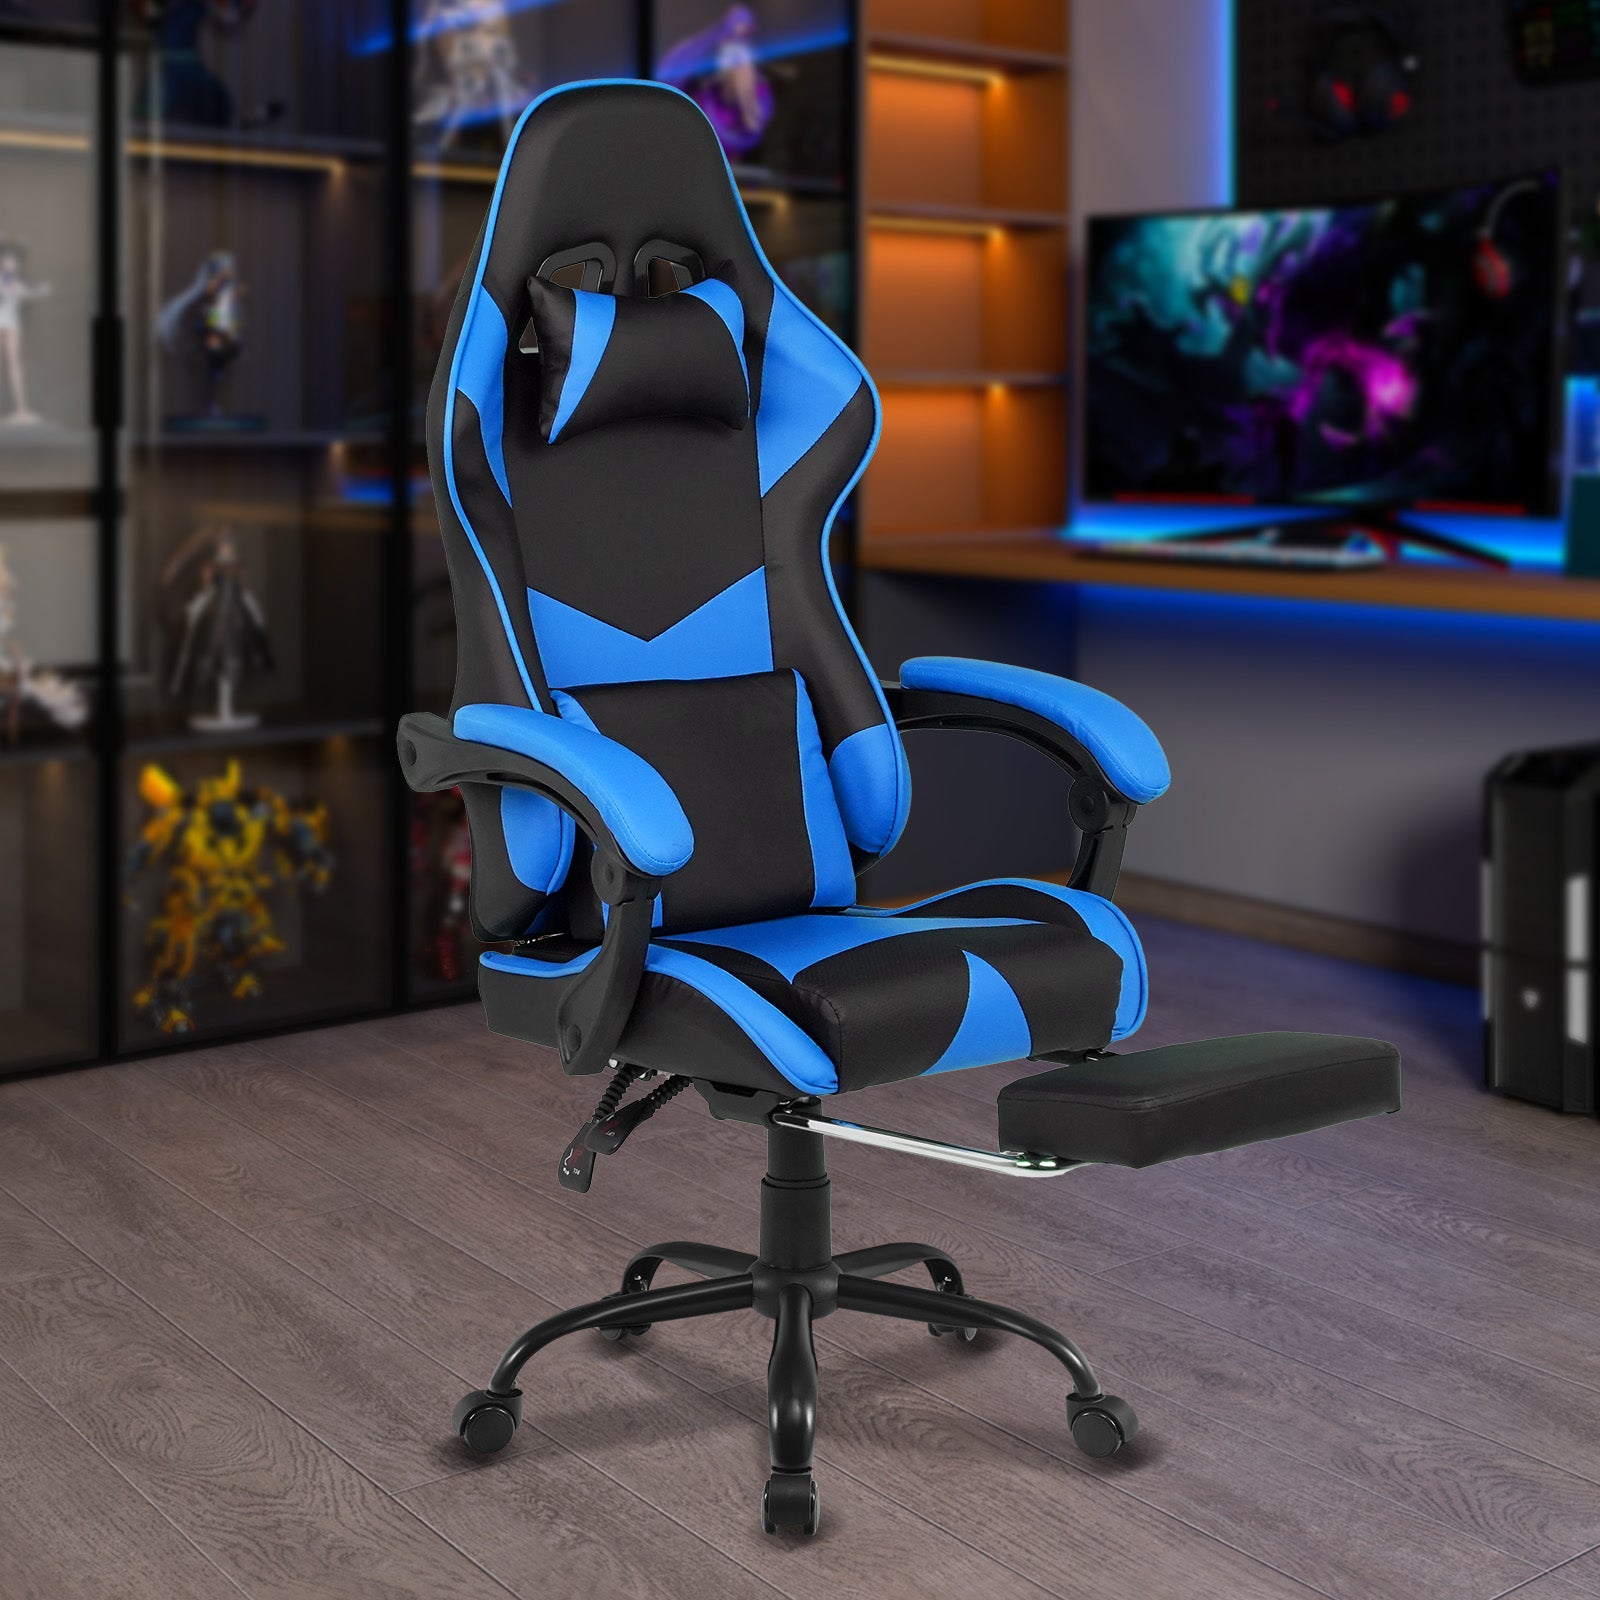 Advwin Gaming Chair Ergonomic office Chair Racing Recliner with Footrest Blue